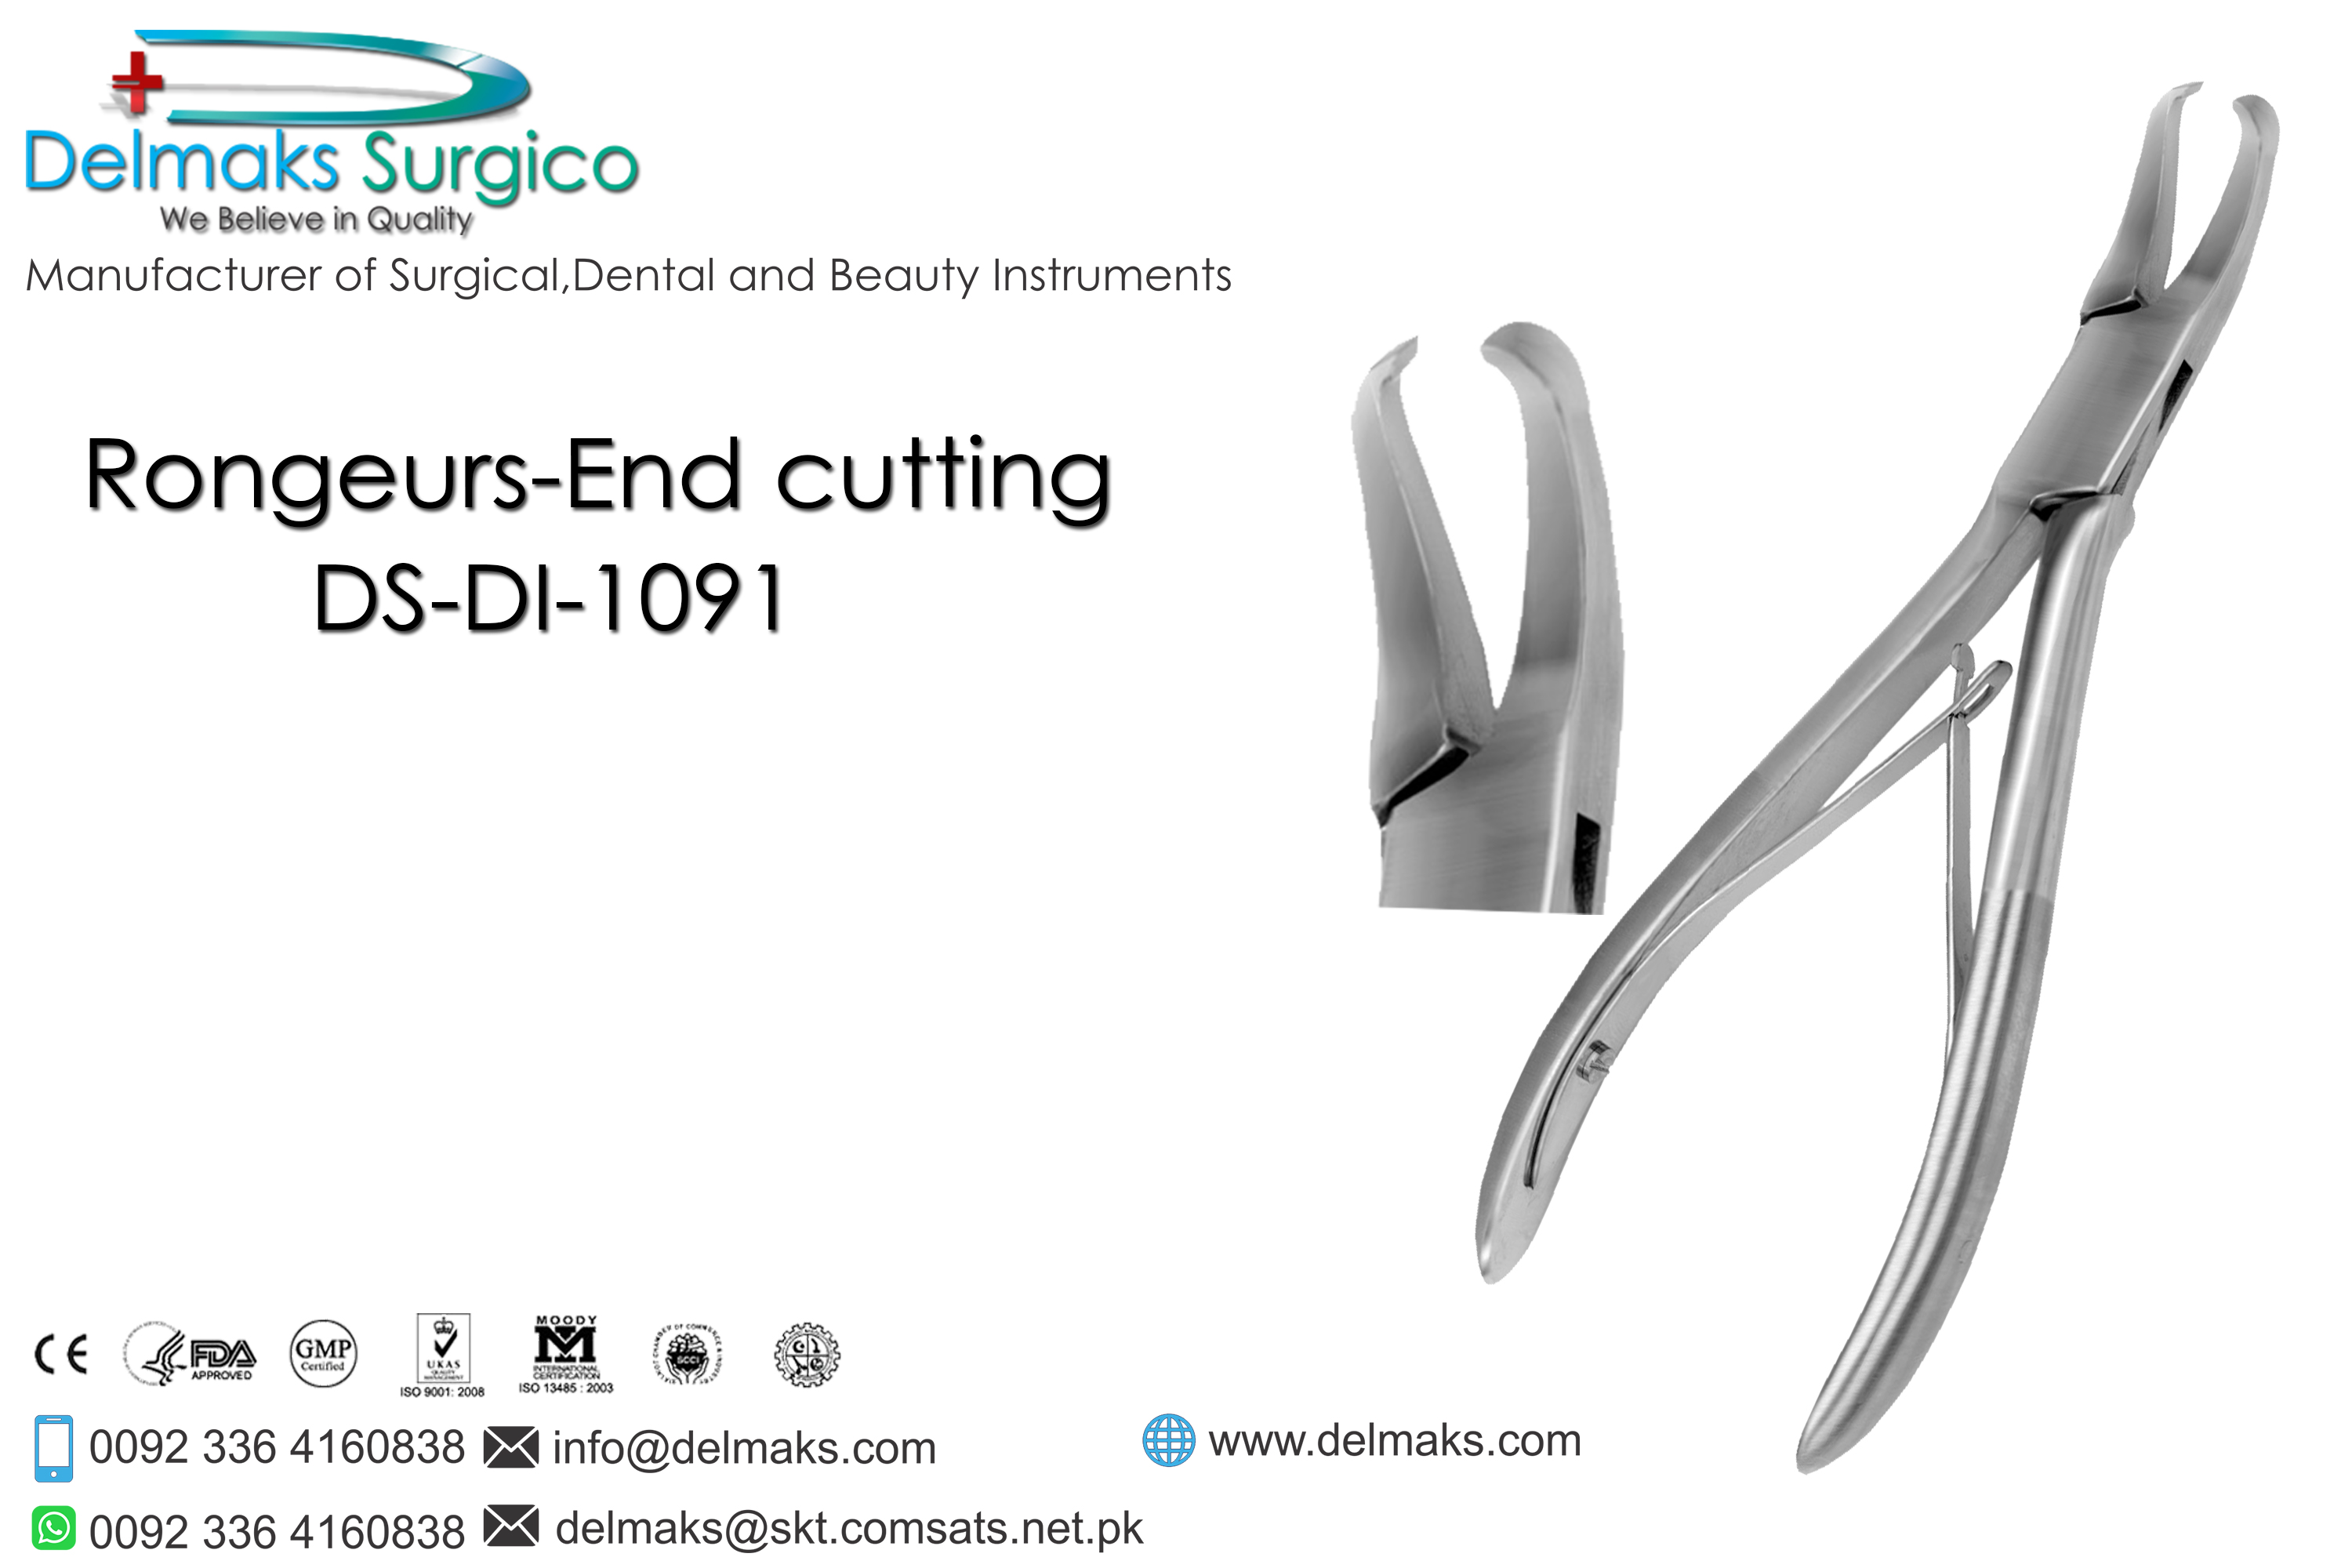 Rongeurs End Cutting-Oral And Maxillofacial Surgery Instruments-Dental Instruments-Delmaks Surgico